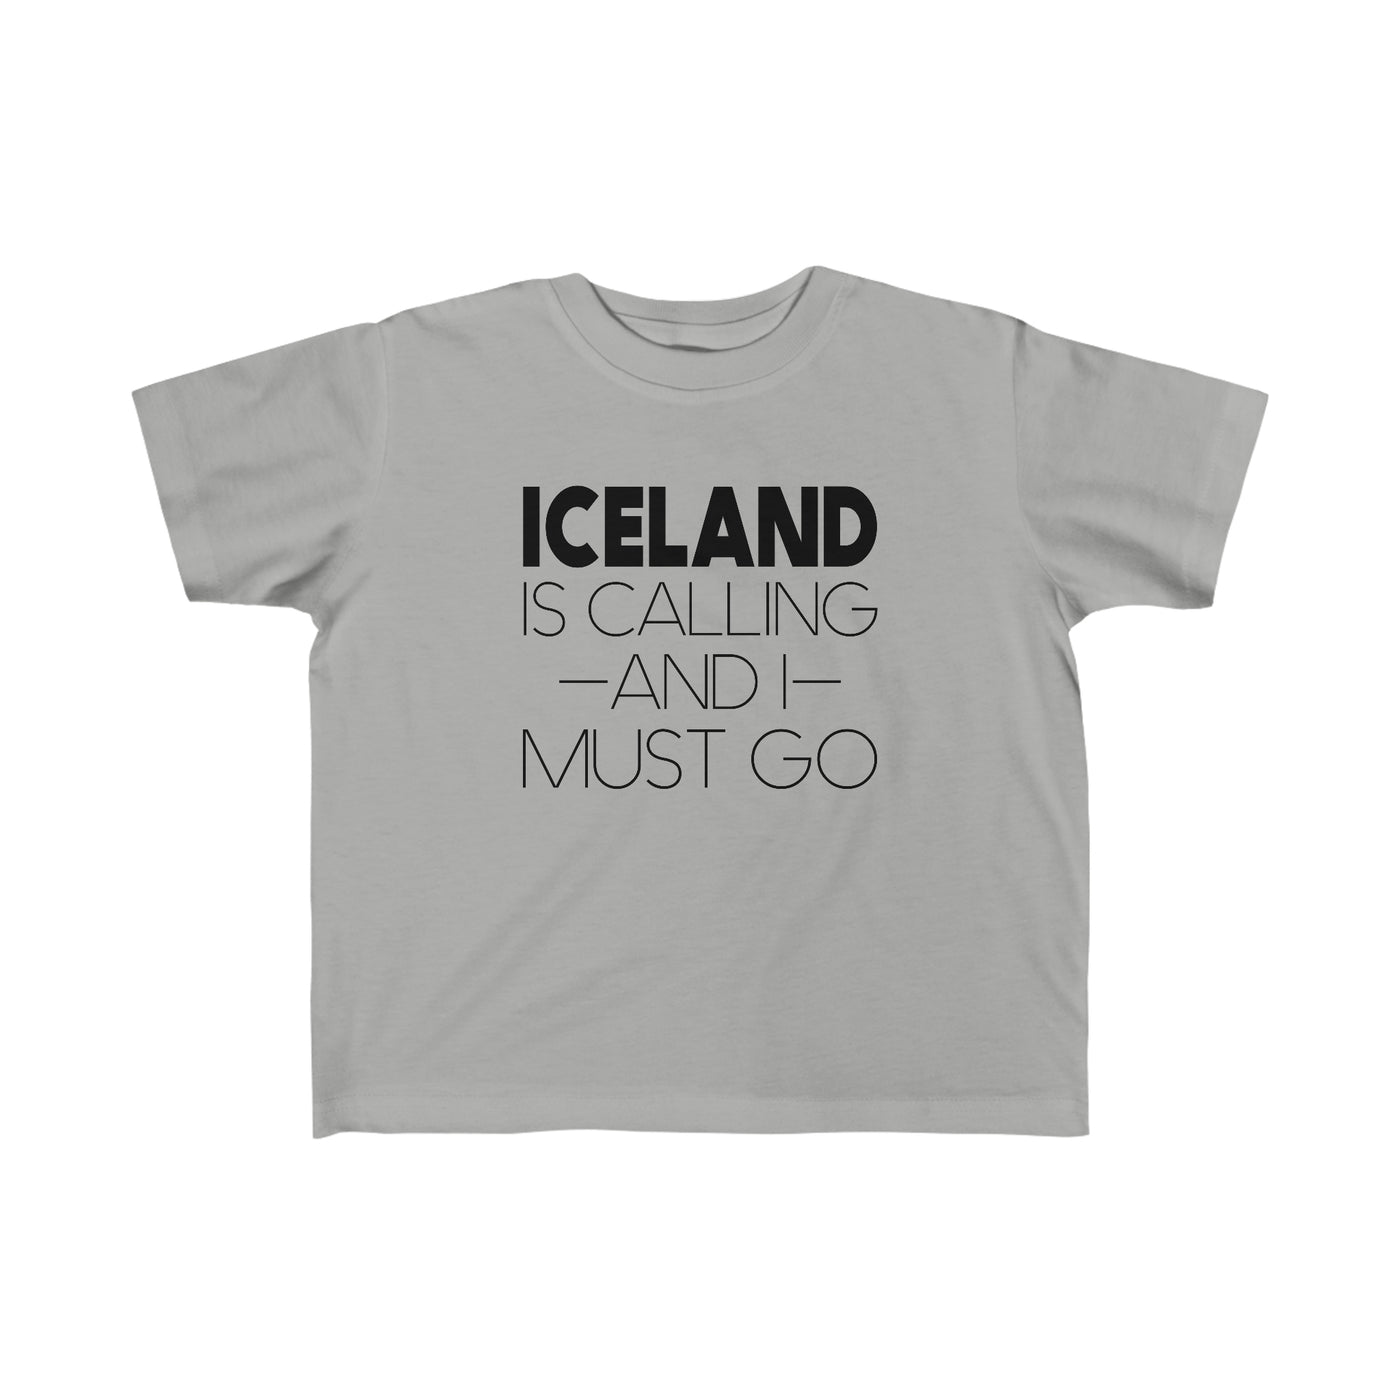 Iceland Is Calling And I Must Go Toddler Tee